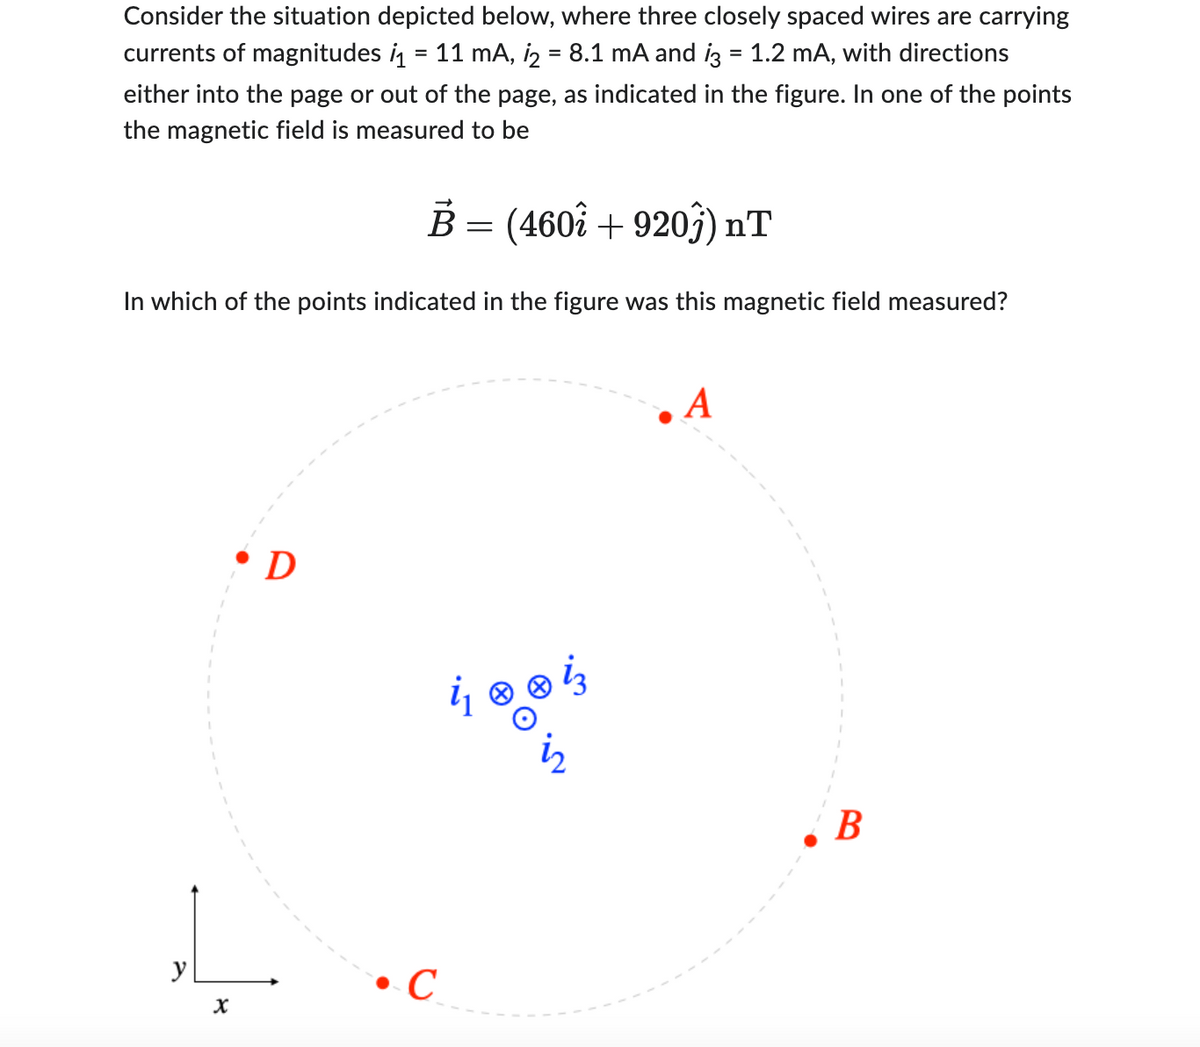 Consider the situation depicted below, where three closely spaced wires are carrying
currents of magnitudes ₁ = 11 mA, 1₂ = 8.1 mA and i3 = 1.2 mA, with directions
either into the page or out of the page, as indicated in the figure. In one of the points
the magnetic field is measured to be
B = (4602 + 9203) nT
In which of the points indicated in the figure was this magnetic field measured?
y
X
• D
C
& ® ܐ
A
B